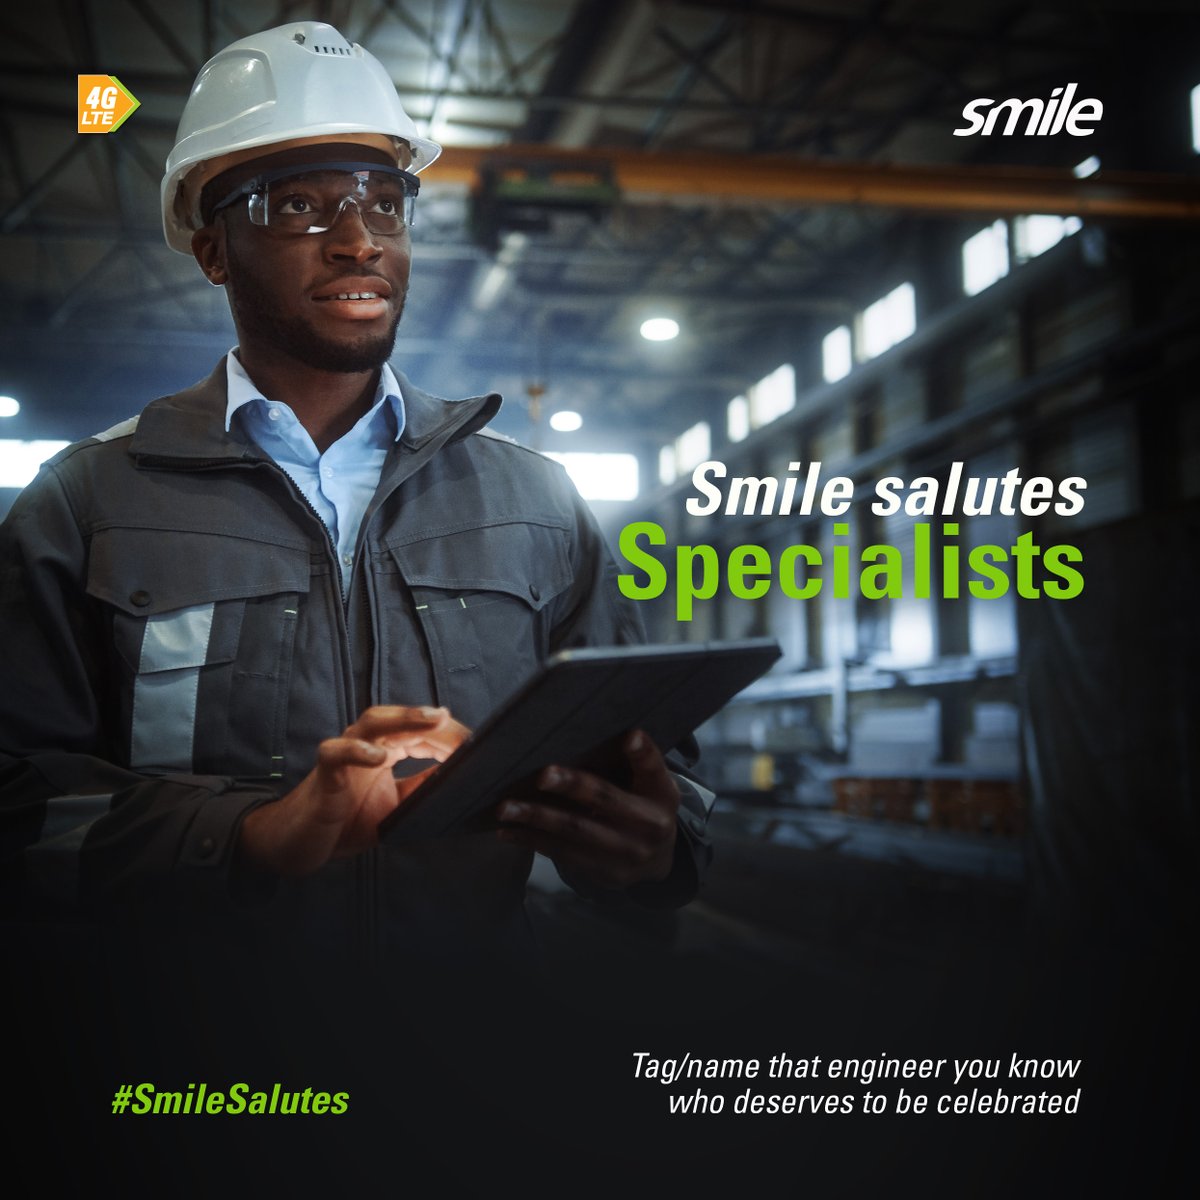 Smile Salutes the expertise of specialists today
 
Tag any hard working specialist that you know who deserves to be   celebrated. 
 
Highest nominations by reactions wins a special gift. Smile
 
#Smile #SmileSalutes #workersday #celebrate